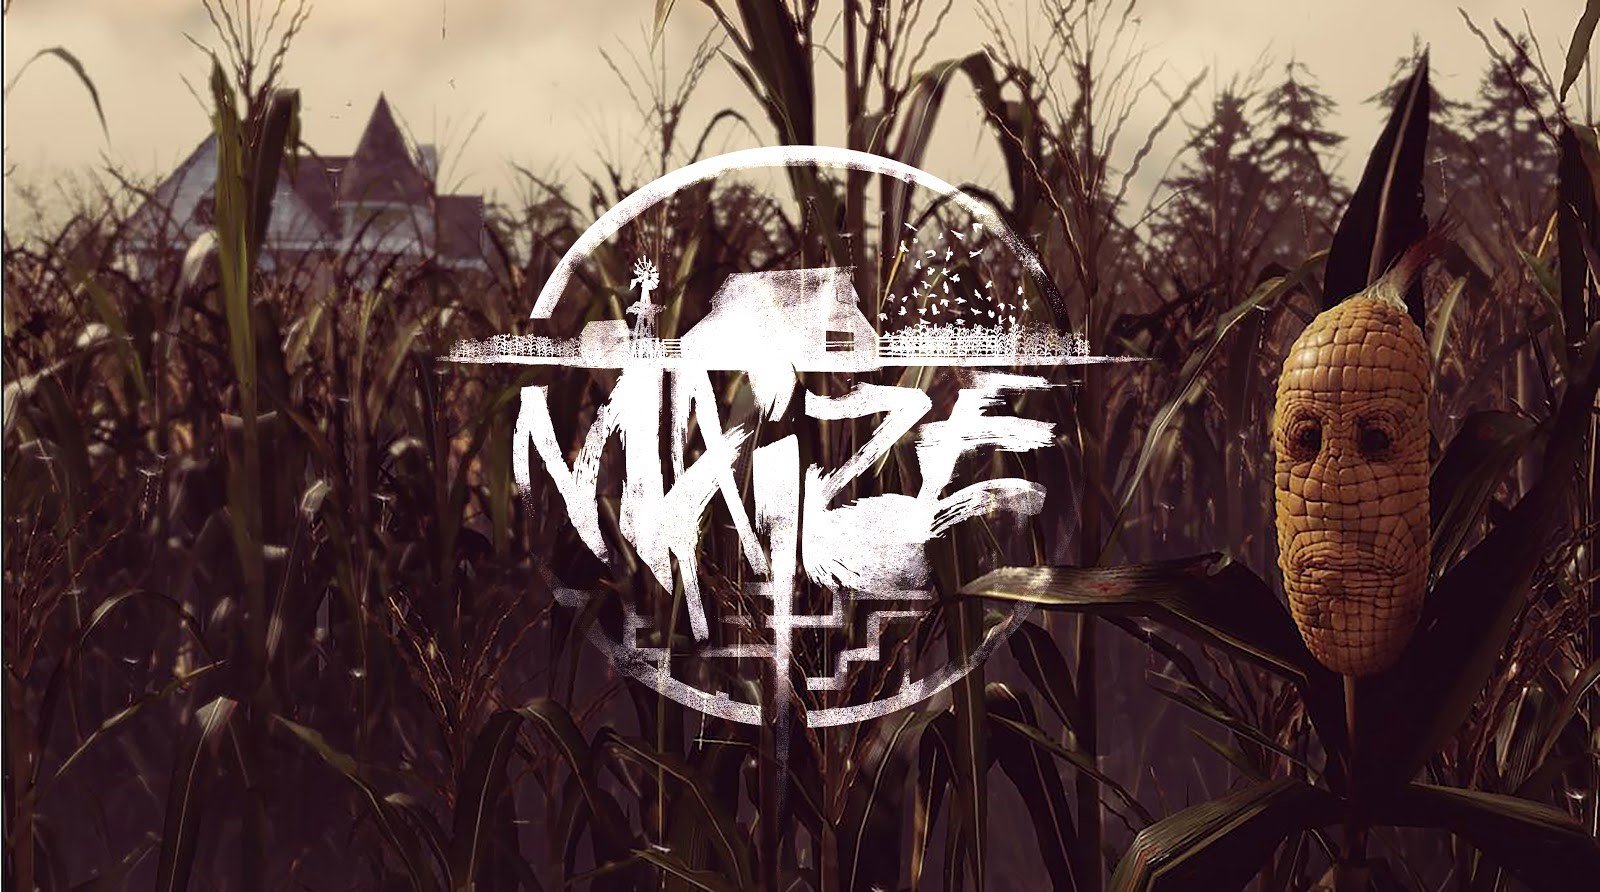 Image of Maize